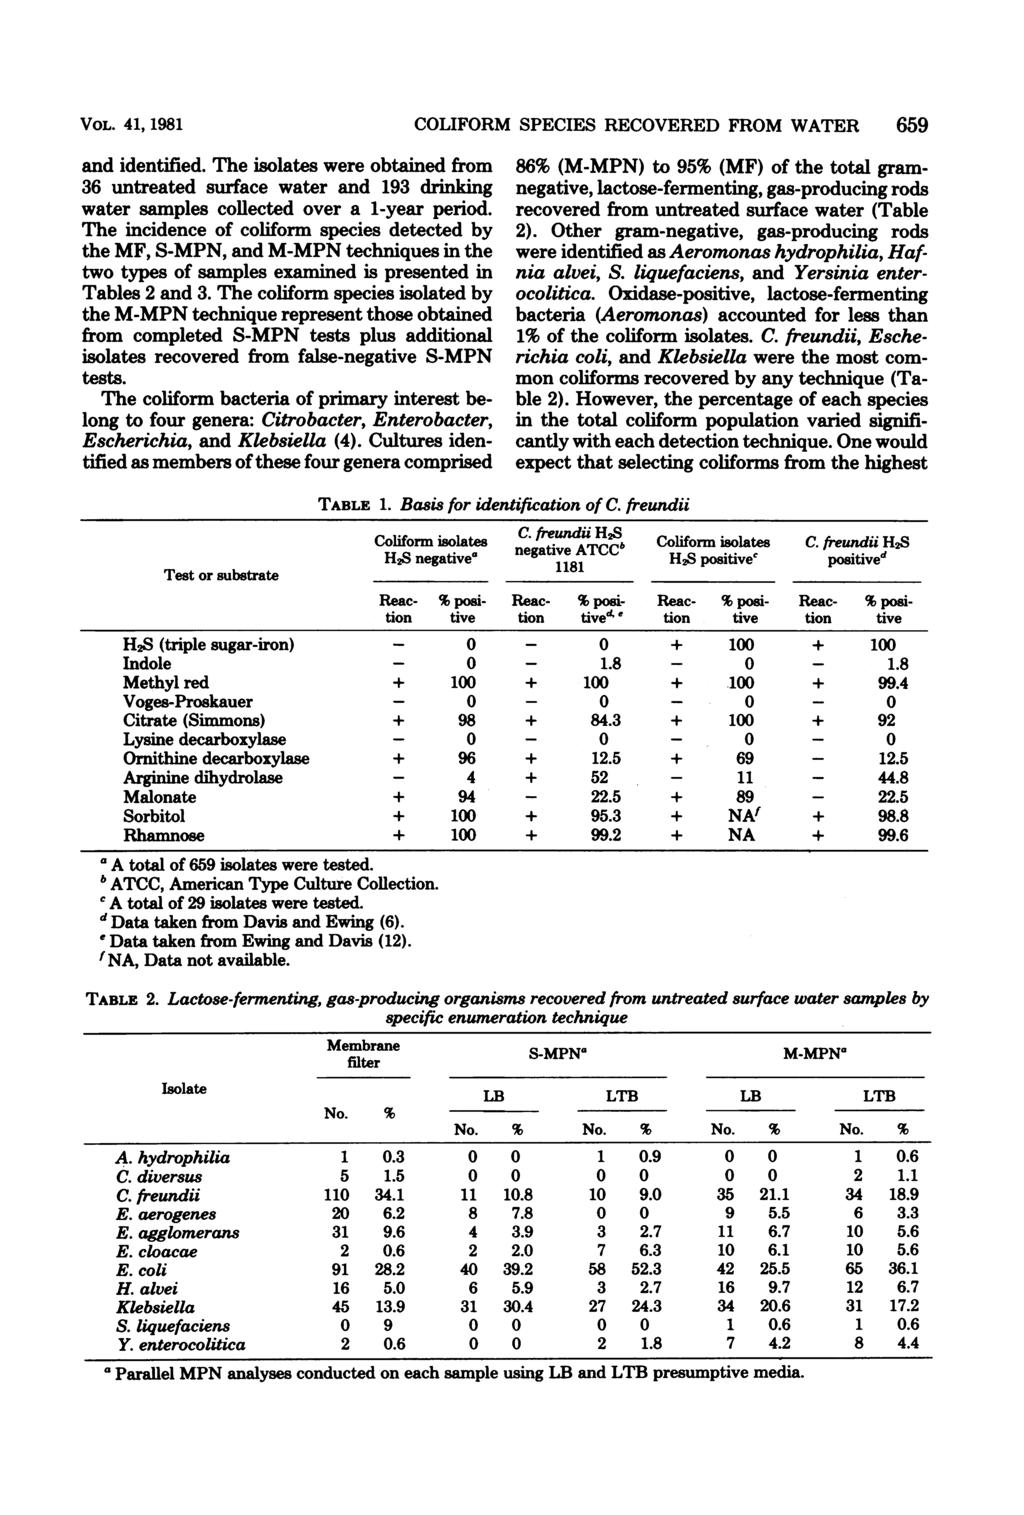 VOL. 41, 1981 and identified. The isolates were obtained from 36 untreated surface water and 193 drinking water samples collected over a 1-year period.